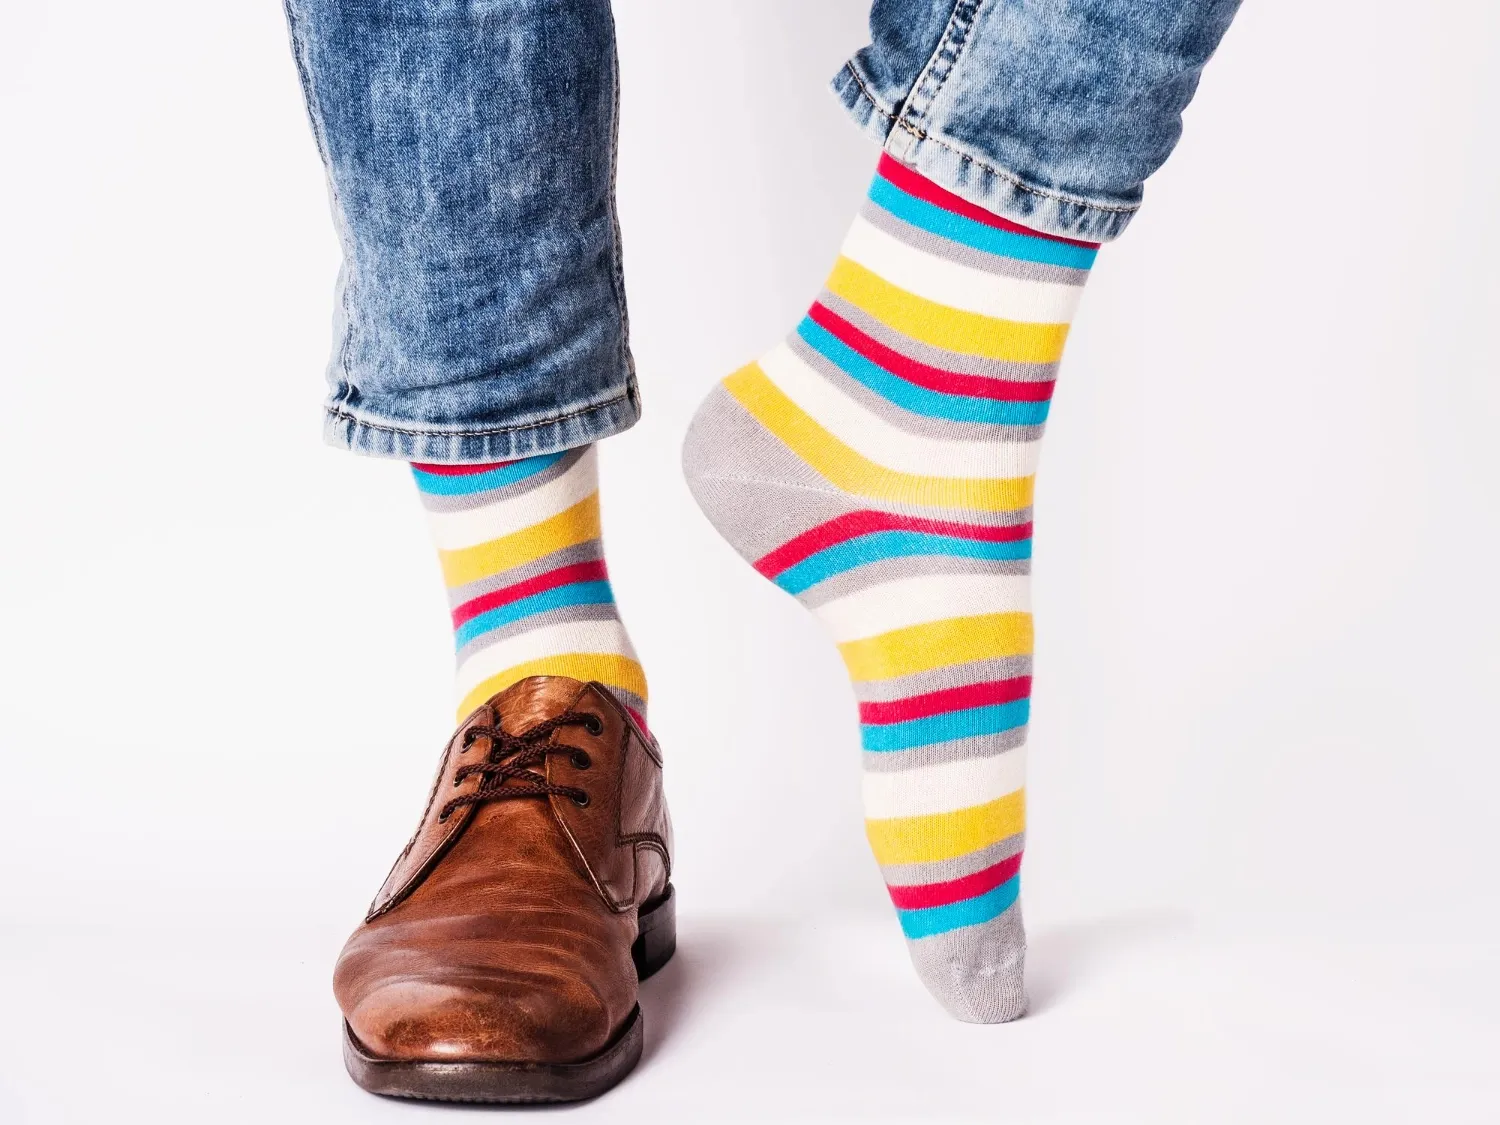 Men's legs trendy shoes and bright socks